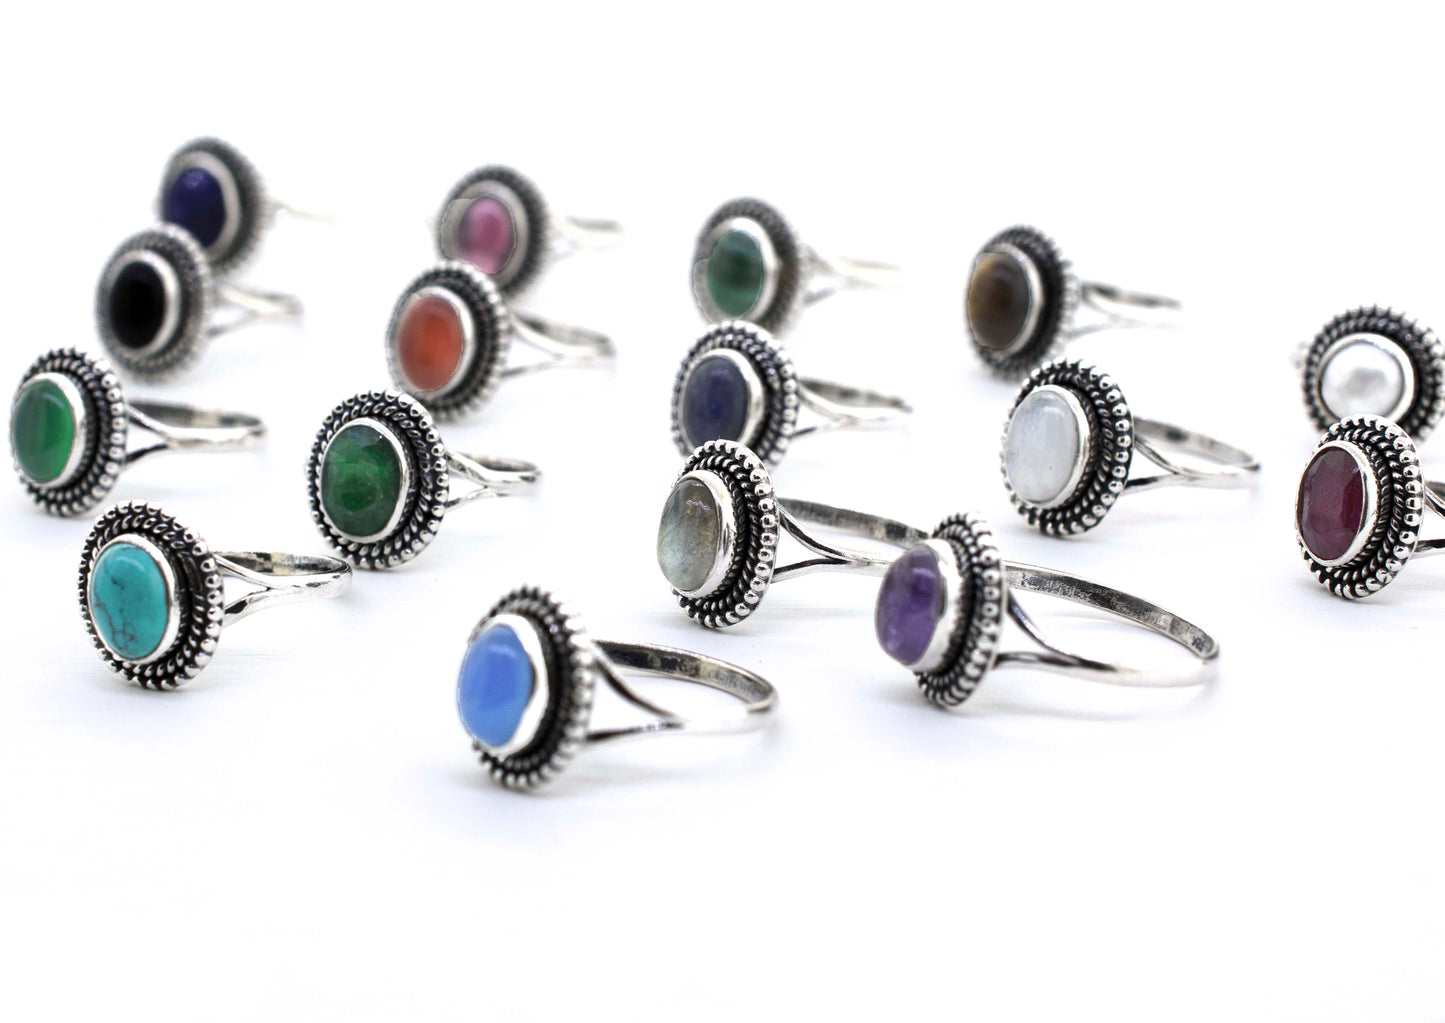 A group of Gemstone Oval Shield Rings with different colored stones, including cabochons.